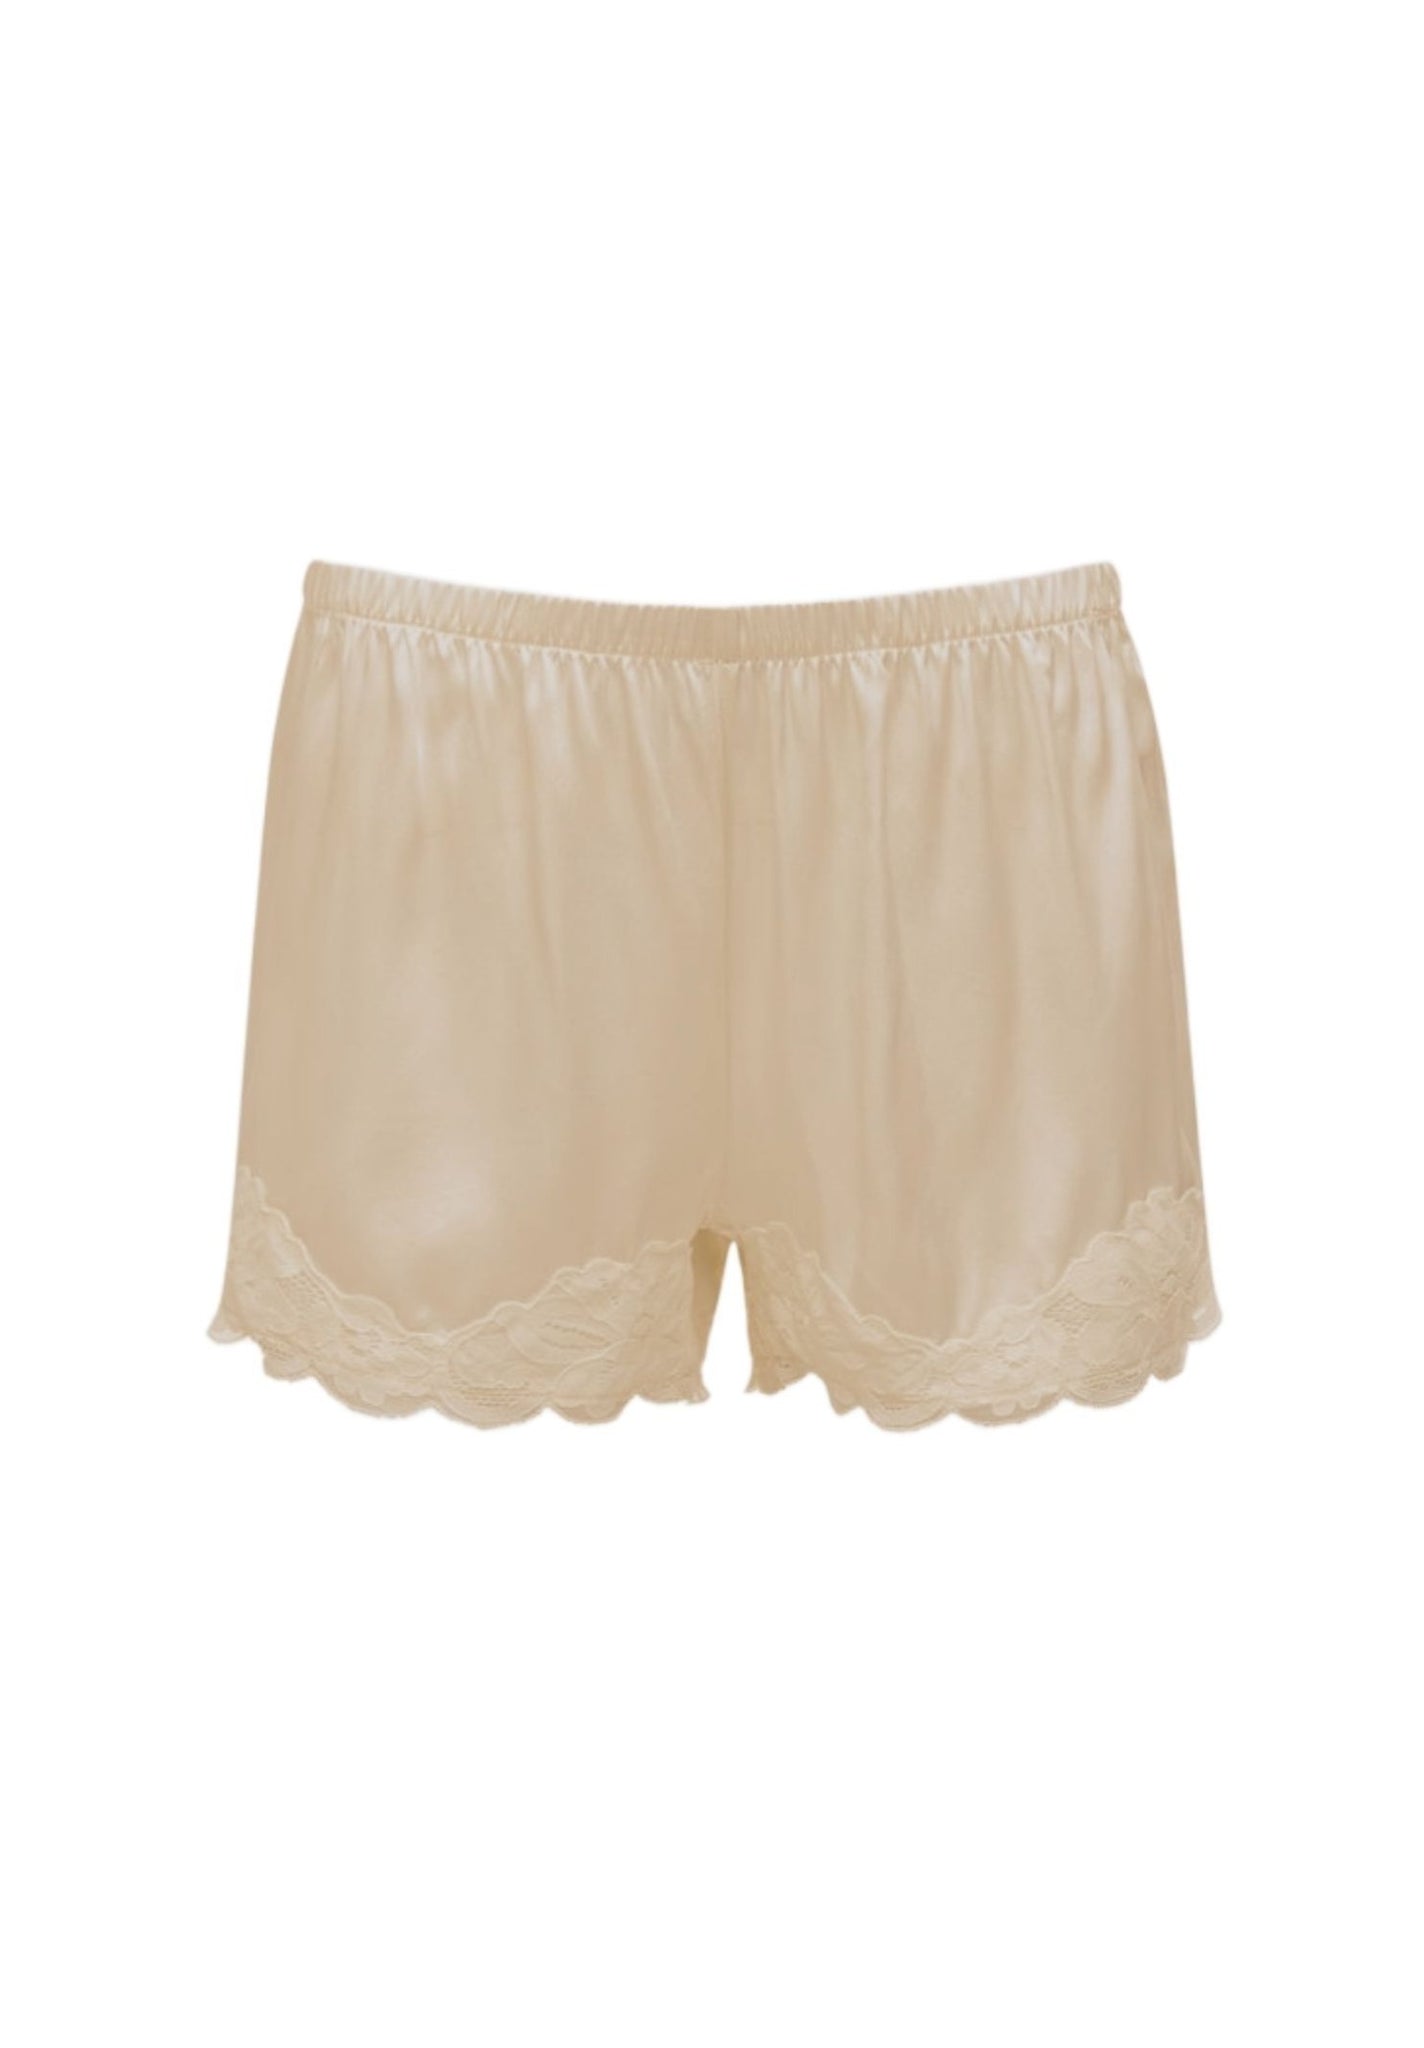 Floral Lace Short in Vanilla